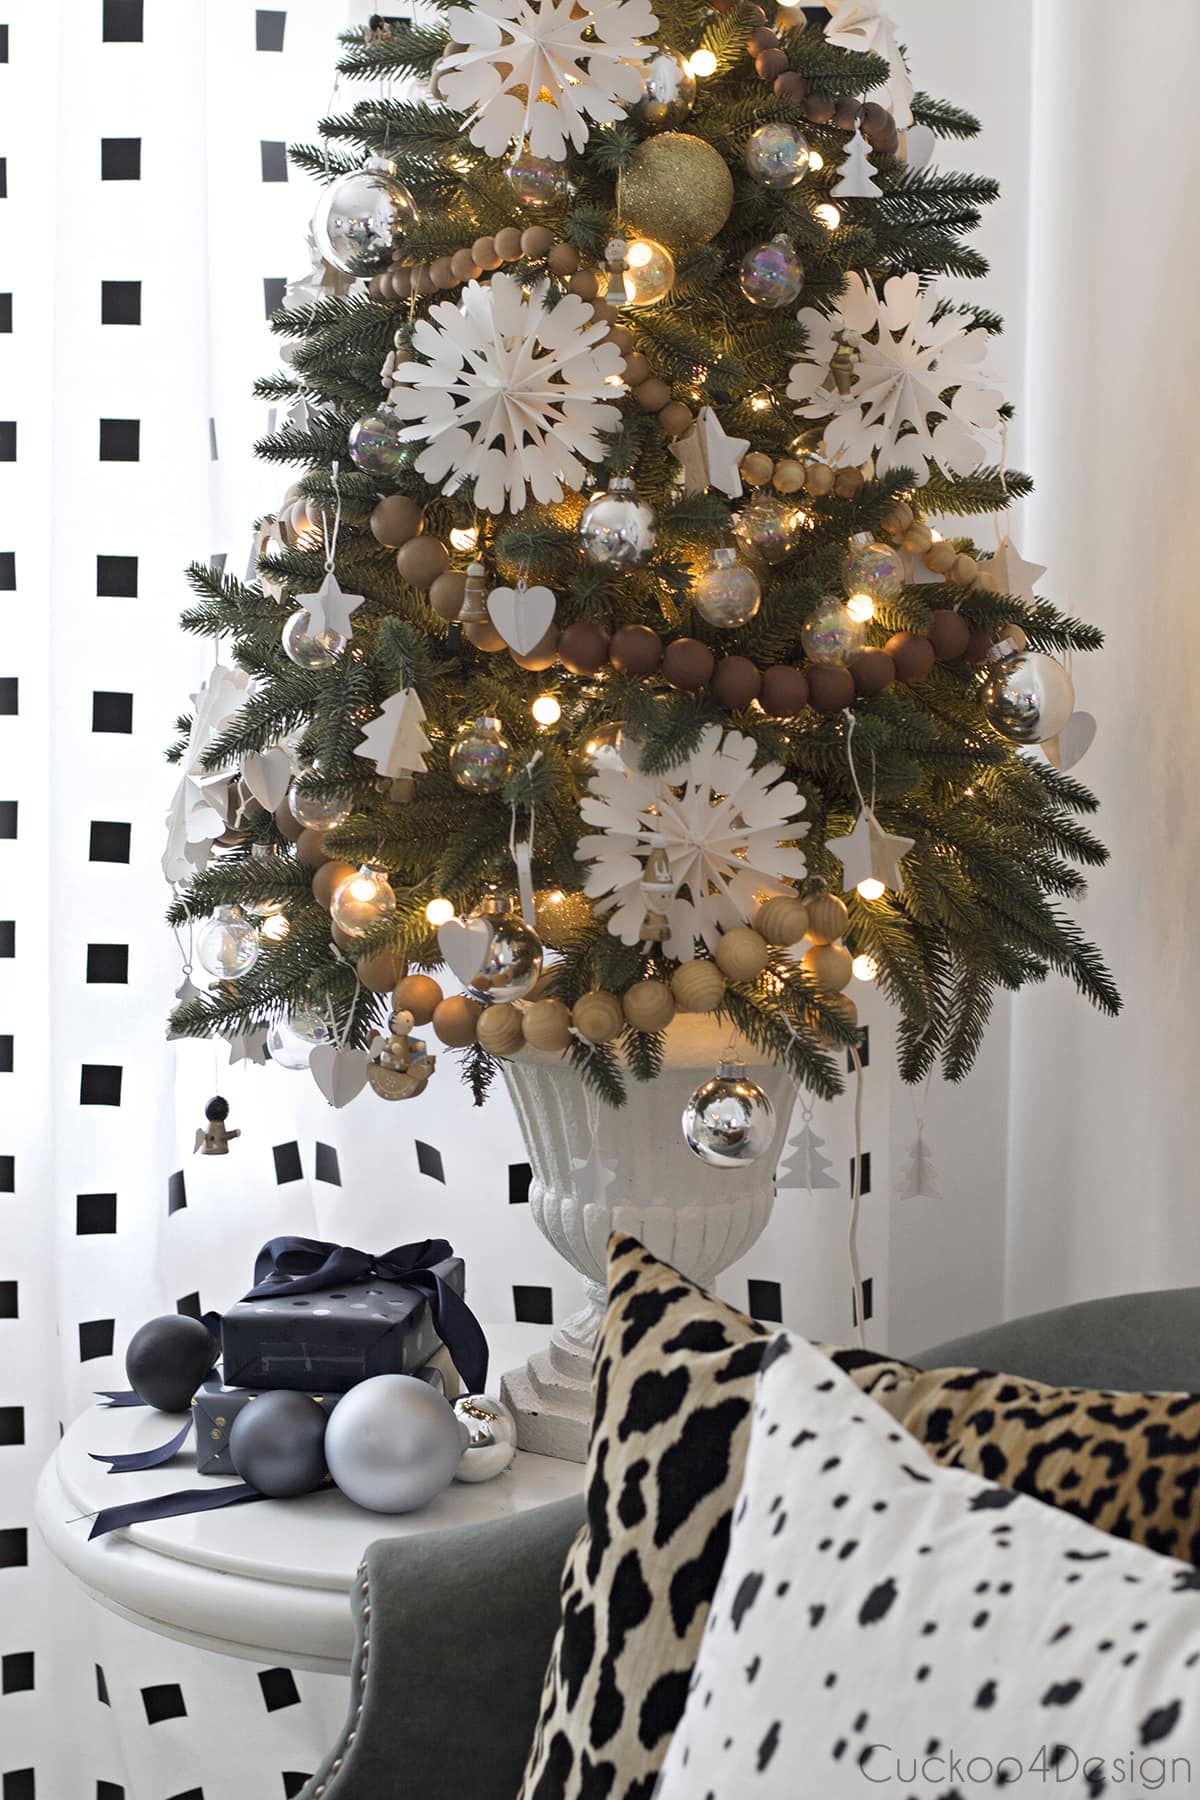 black and white decor with snowflake ornament tree